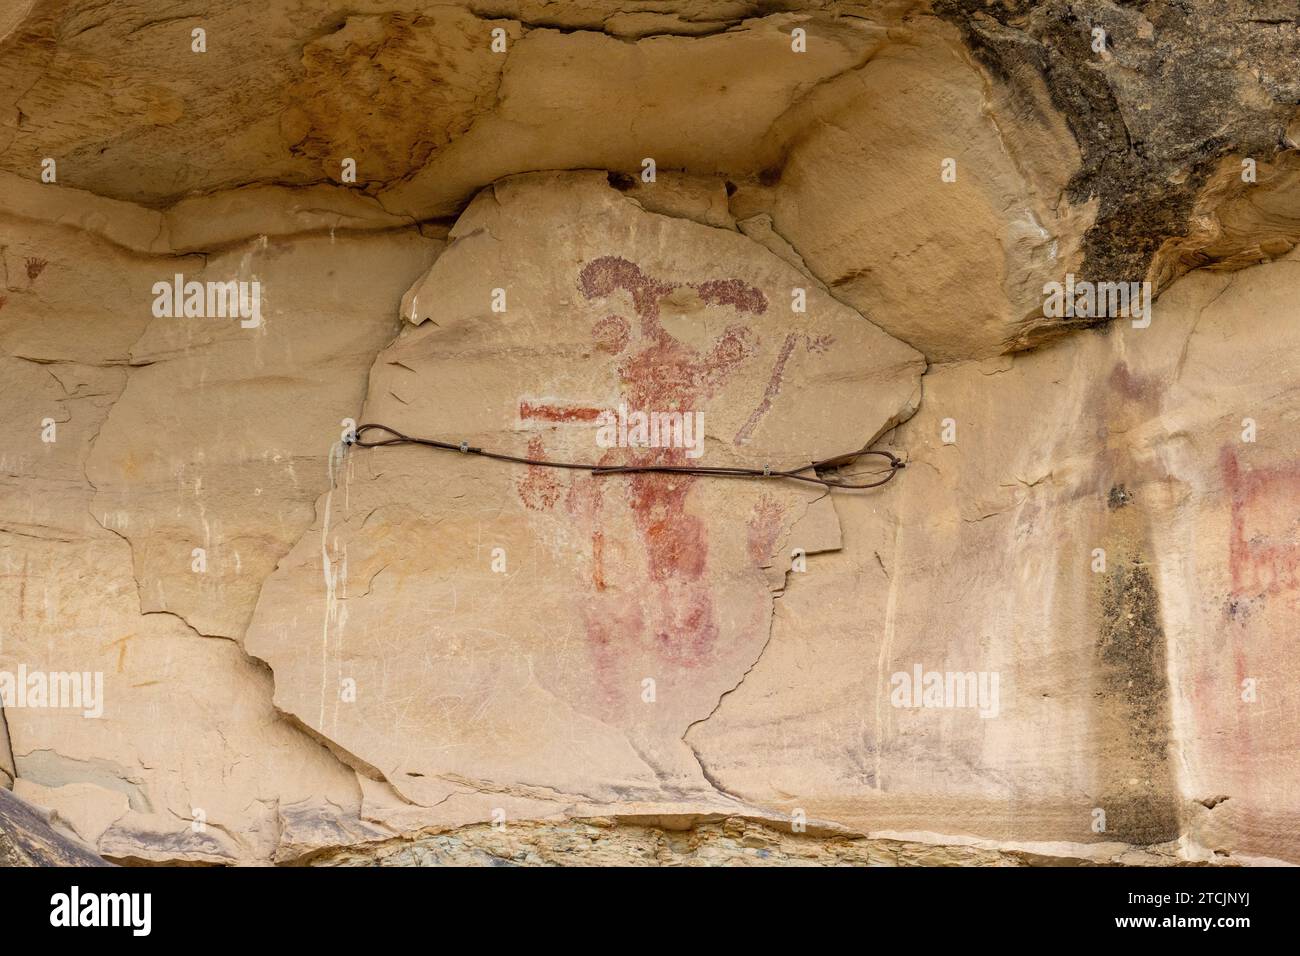 Pre-Hispanic pictographs at the Kokopelli Interpretive Site in the Canyon Pintado National Historic District in Colorado.  Note the stabilization cabl Stock Photo